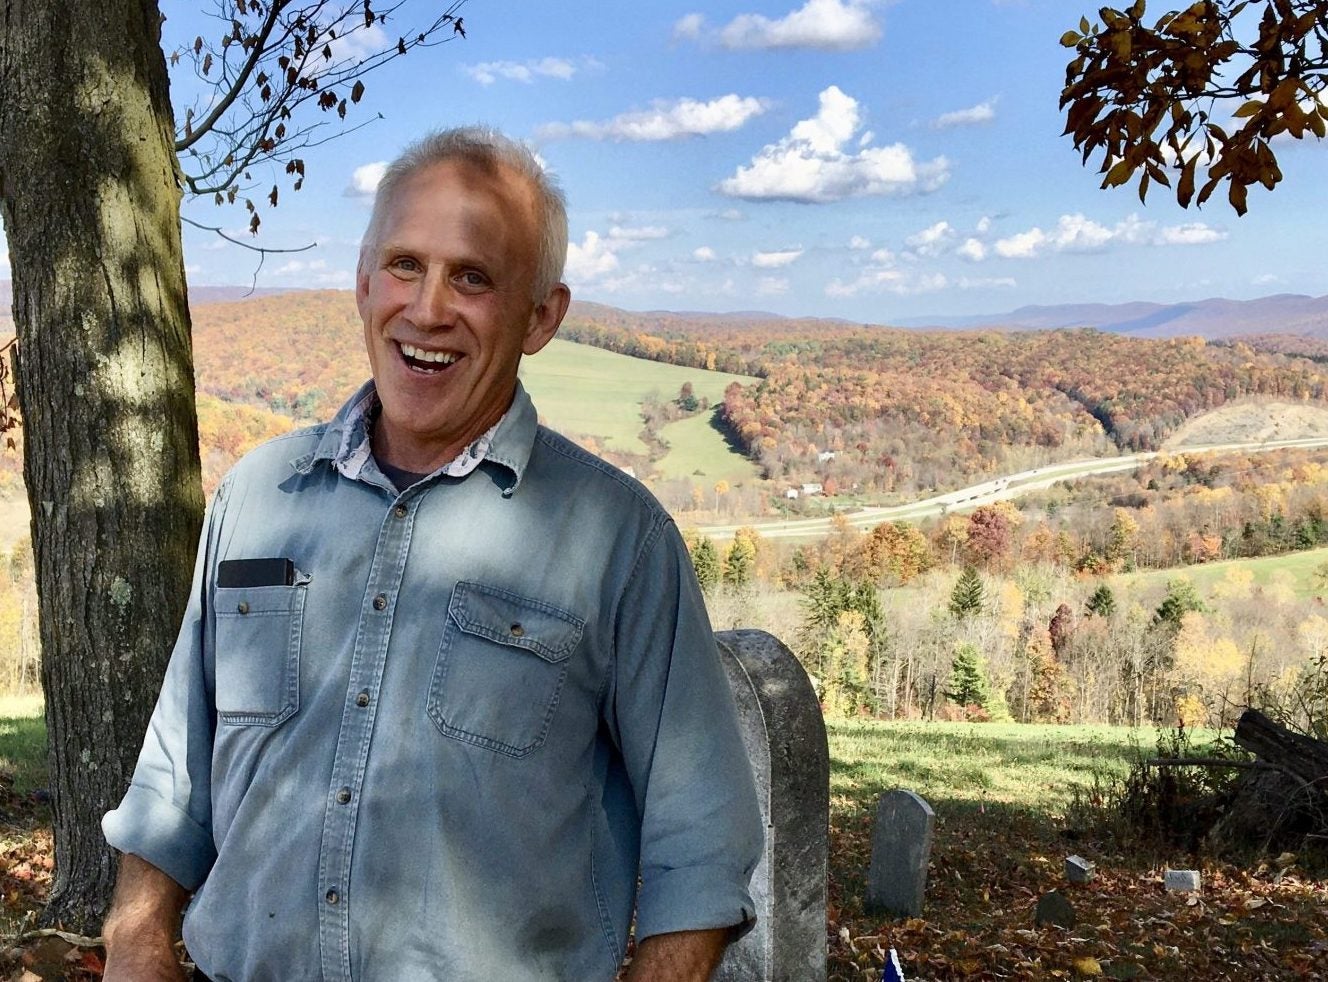 As election nears, Pa. farmers — who see climate change effects up close — have a list of things they want from government leaders - WHYY